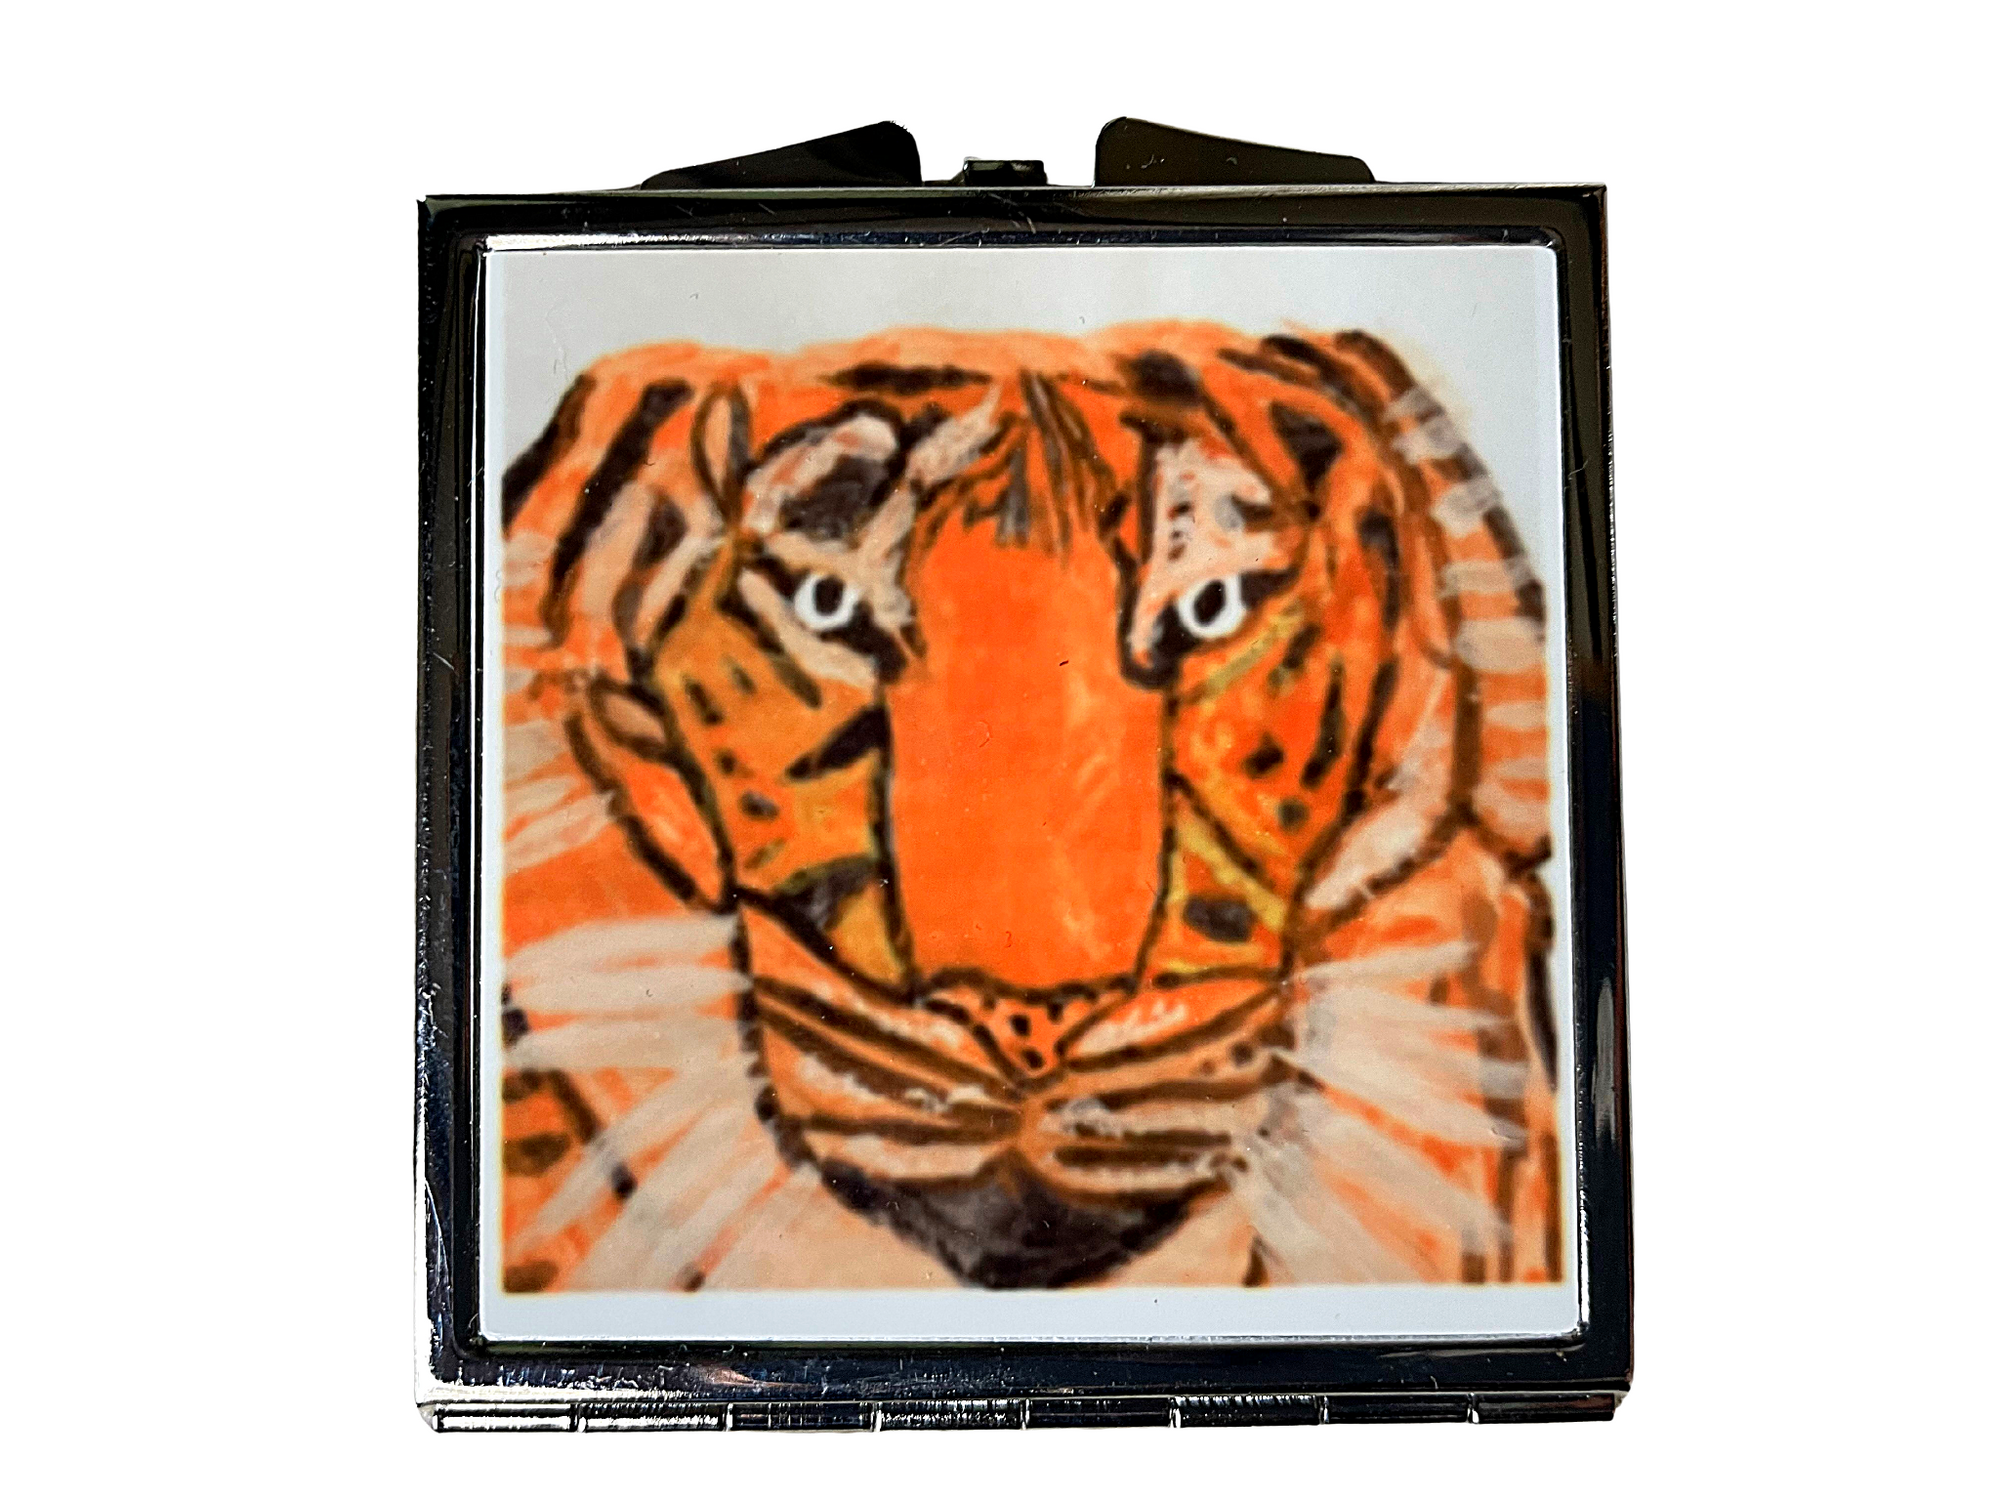 *Compact Mirror with tiger design